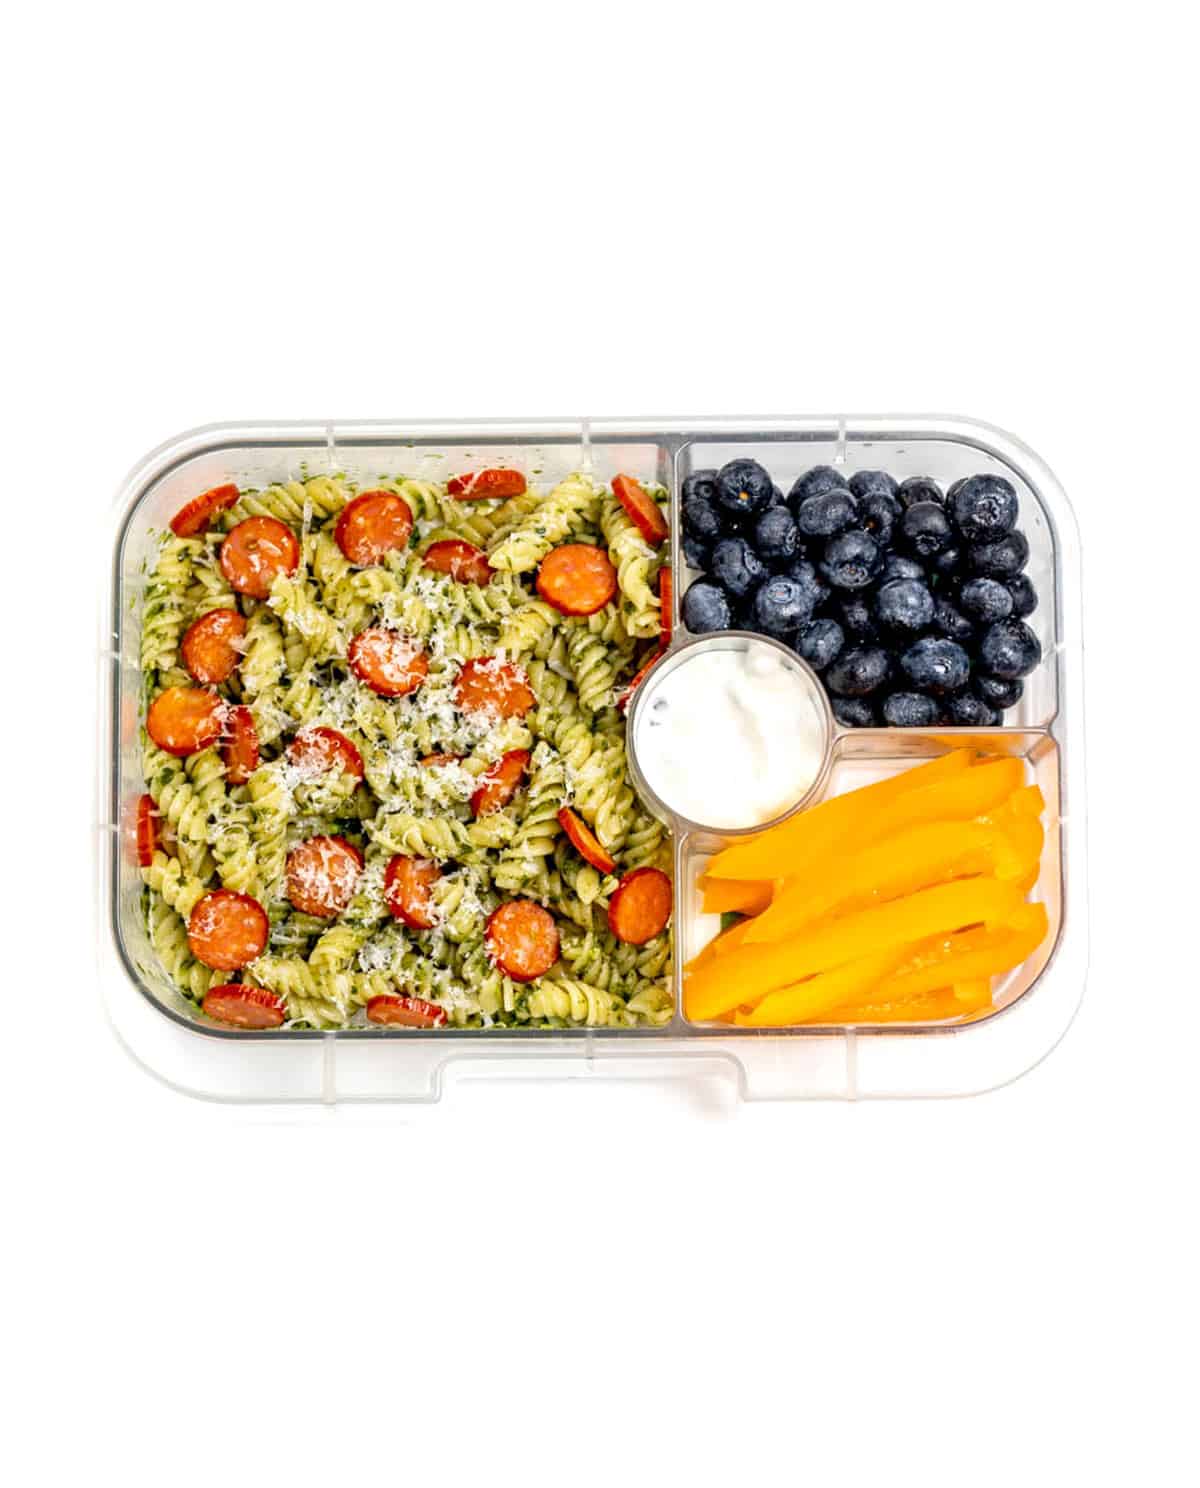 A lunch box with pesto pasta salad with mini pepperoni slices, parmesan cheese, served with yellow pepper slices, dip and blueberries.